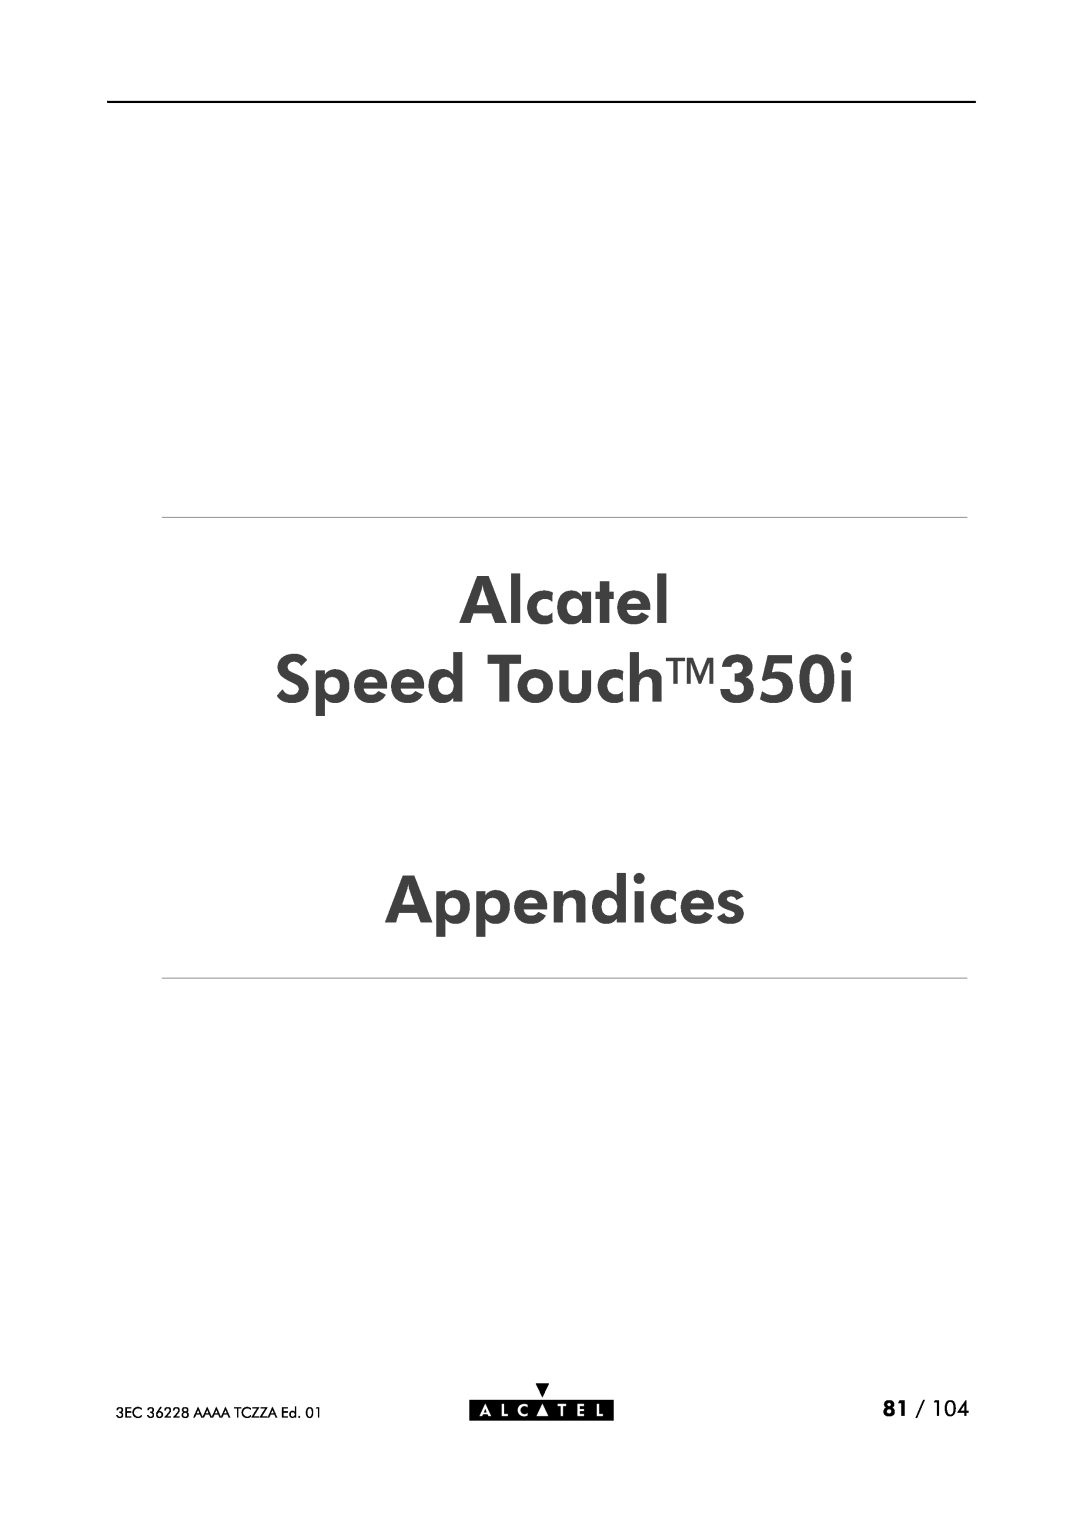 Alcatel Carrier Internetworking Solutions 350I manual Alcatel Speed Touch Appendices, 3EC 36228 AAAA TCZZA Ed 